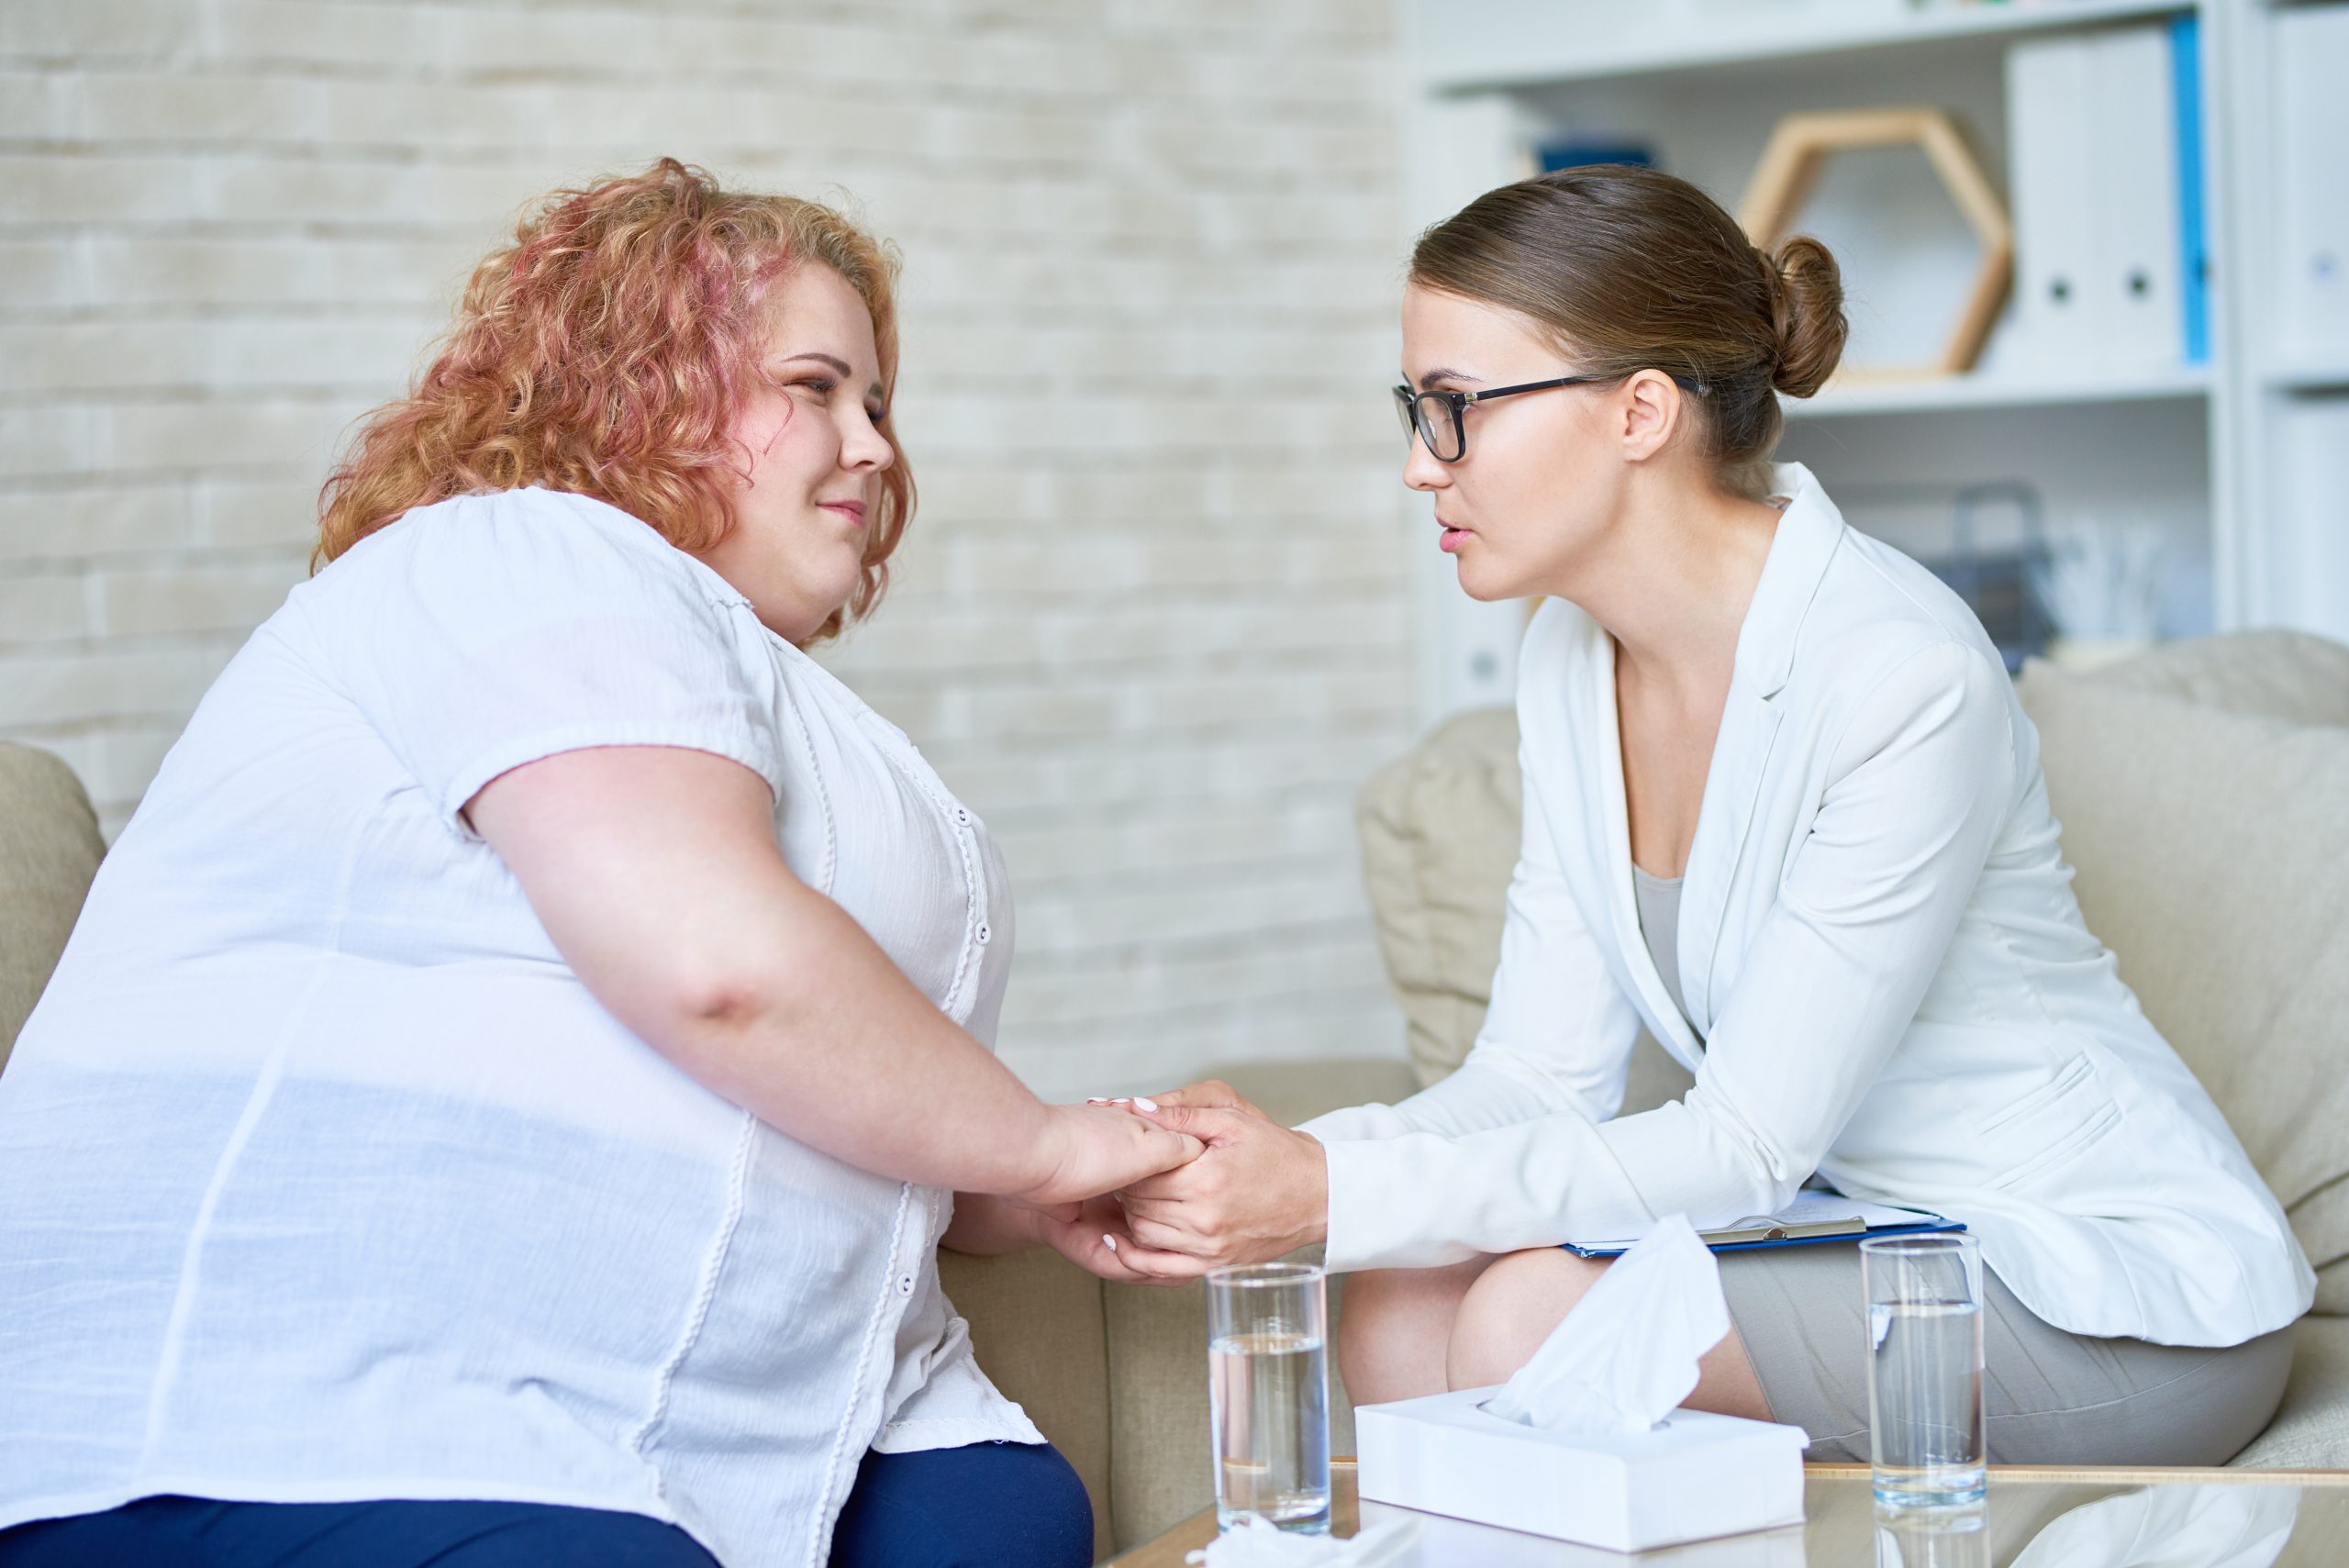 Obese young Woman in Psychotherapy Session